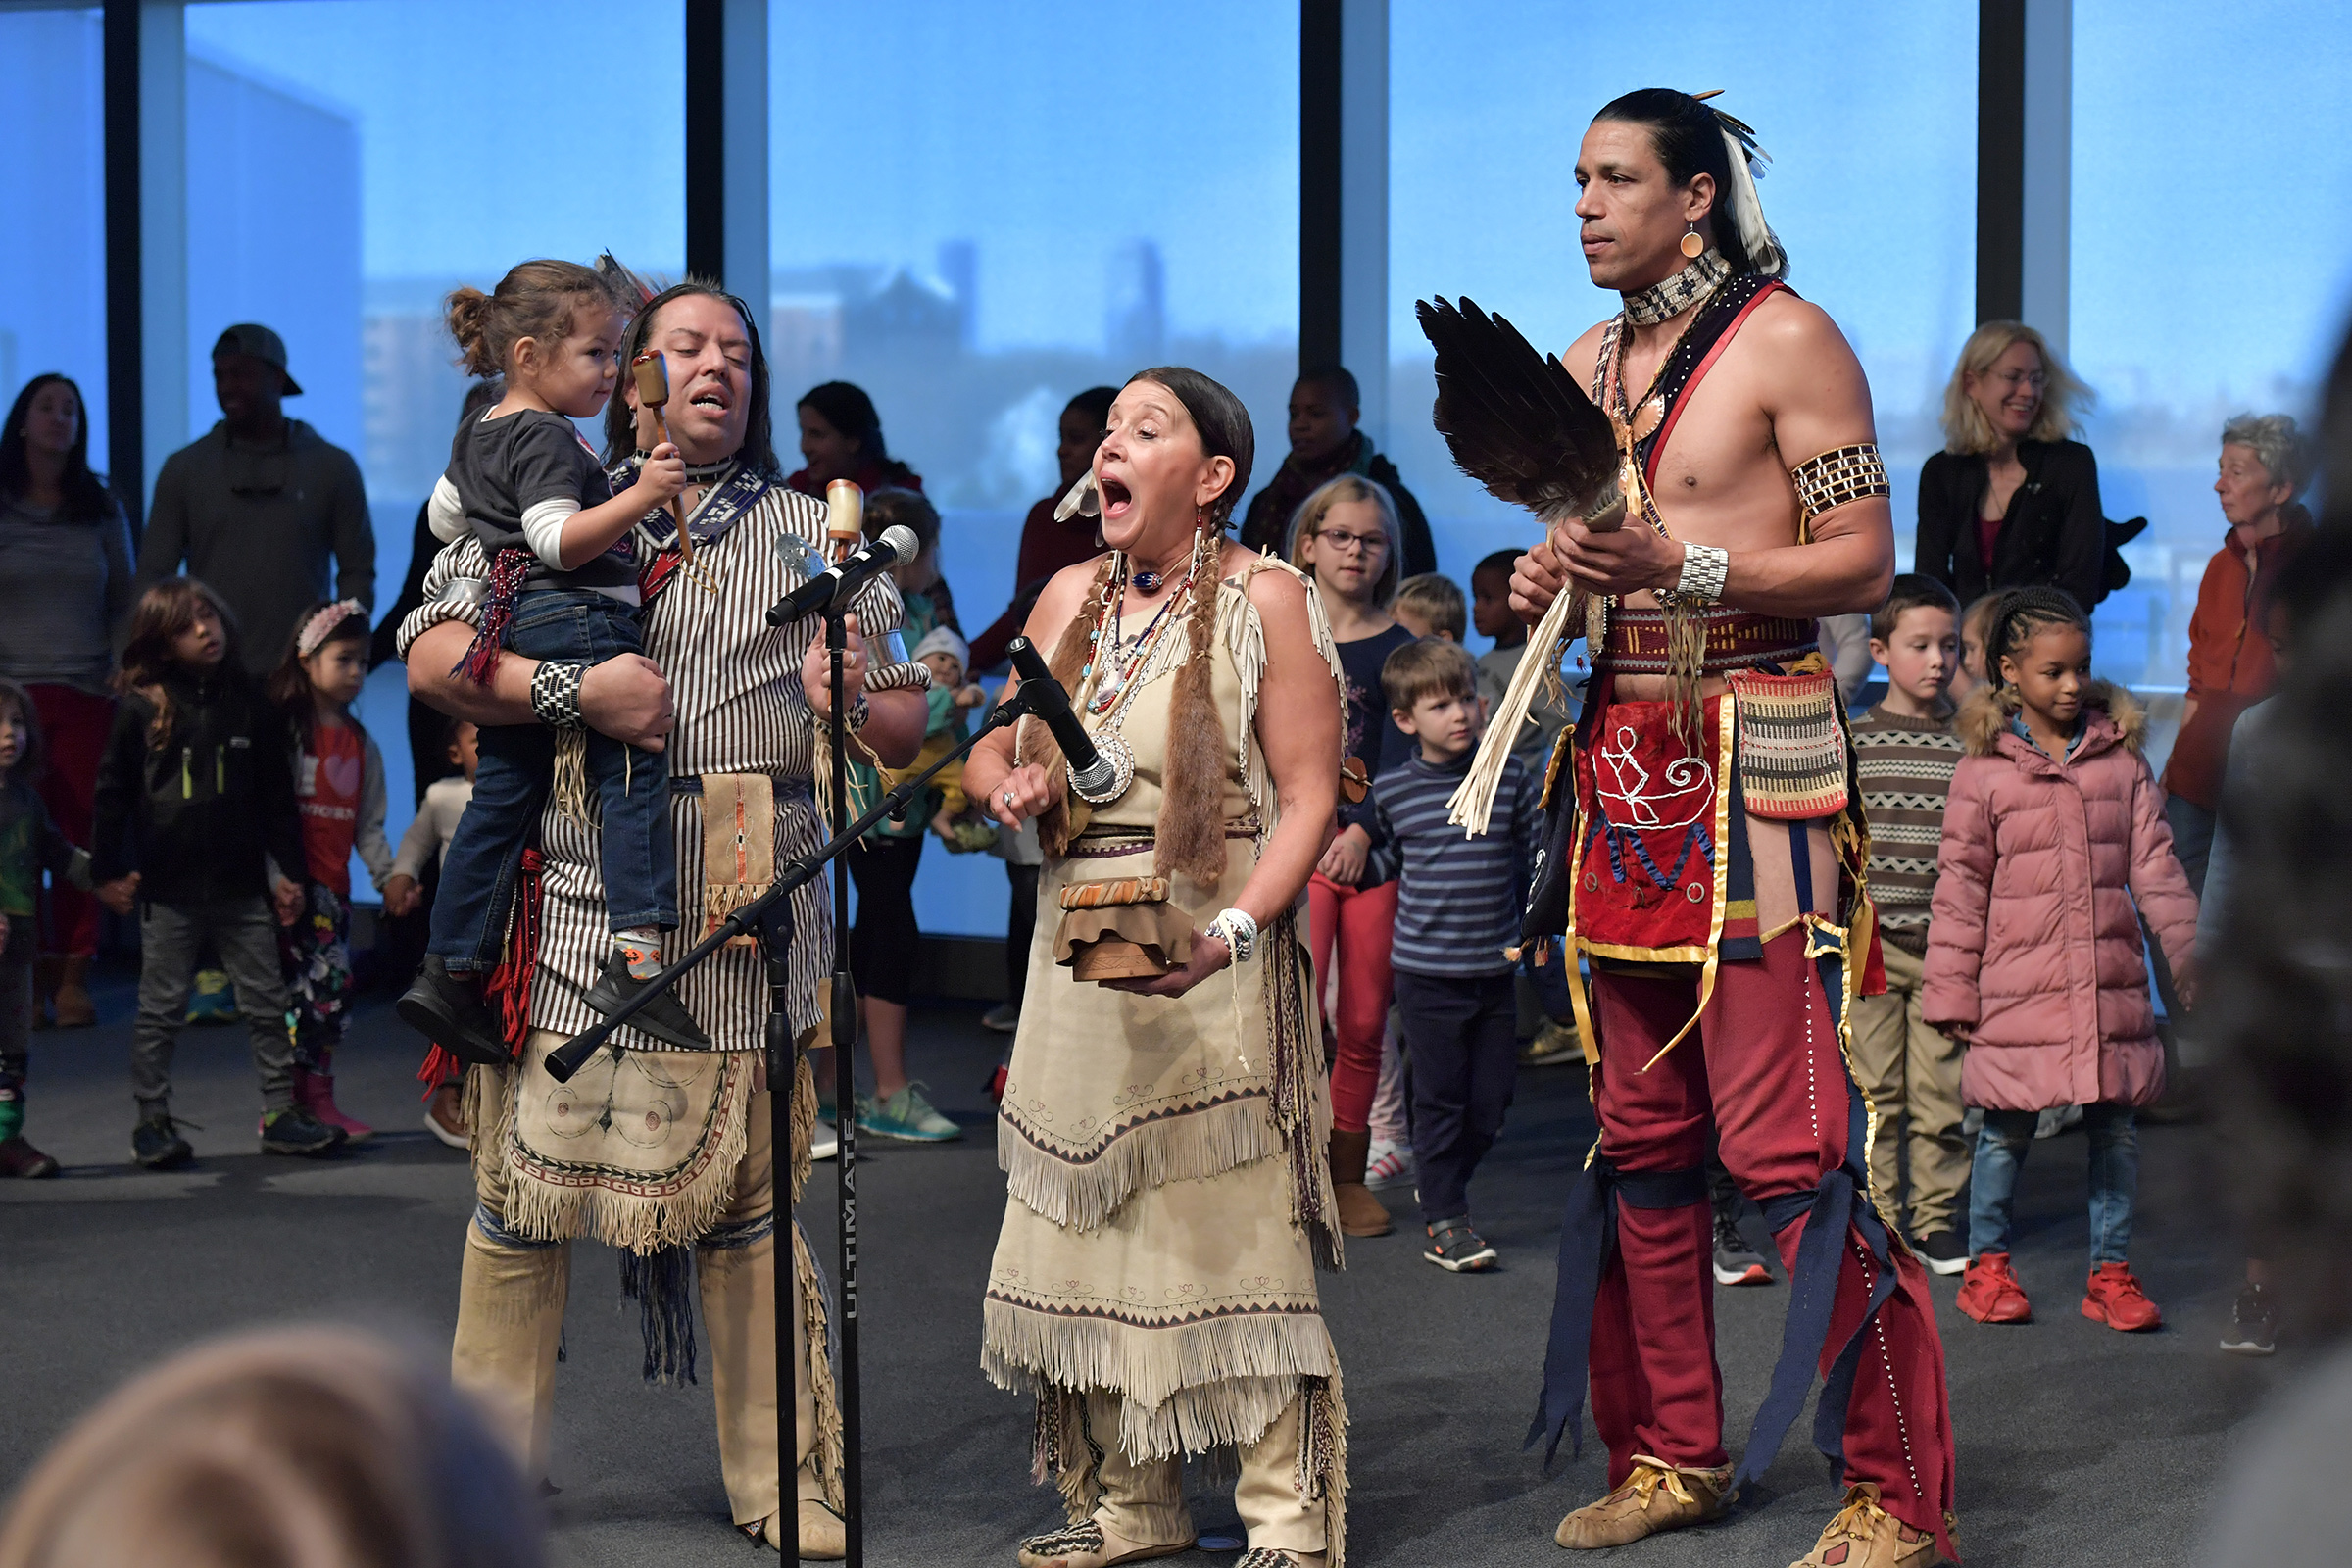 The Wampanoag Nation Singers and Dancers, including Jonathan James-Perry (L) and Kitty Hendricks Miller (C) perform at the John F. Kennedy Presidential Library and Museum on Nov. 29, 2019 in Boston to commemorate Native American Heritage Month (Paul Marotta—Getty Images)